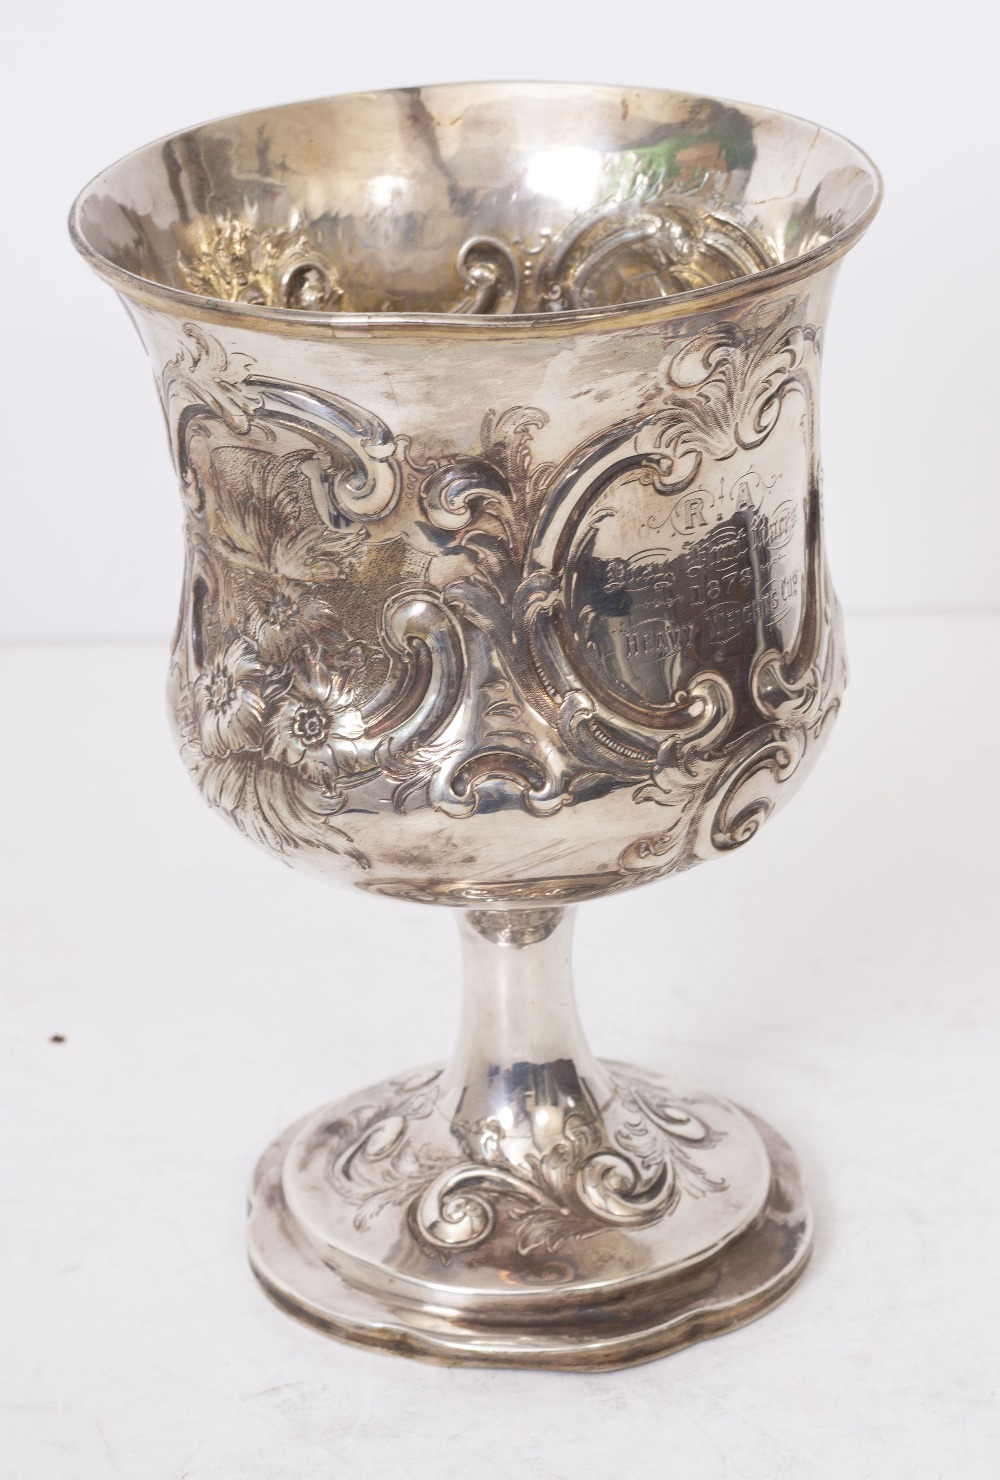 A LARGE GEORGIAN SILVER CUP with embossed / engraved floral cartouches and engraved with 'R A Drag - Image 6 of 8